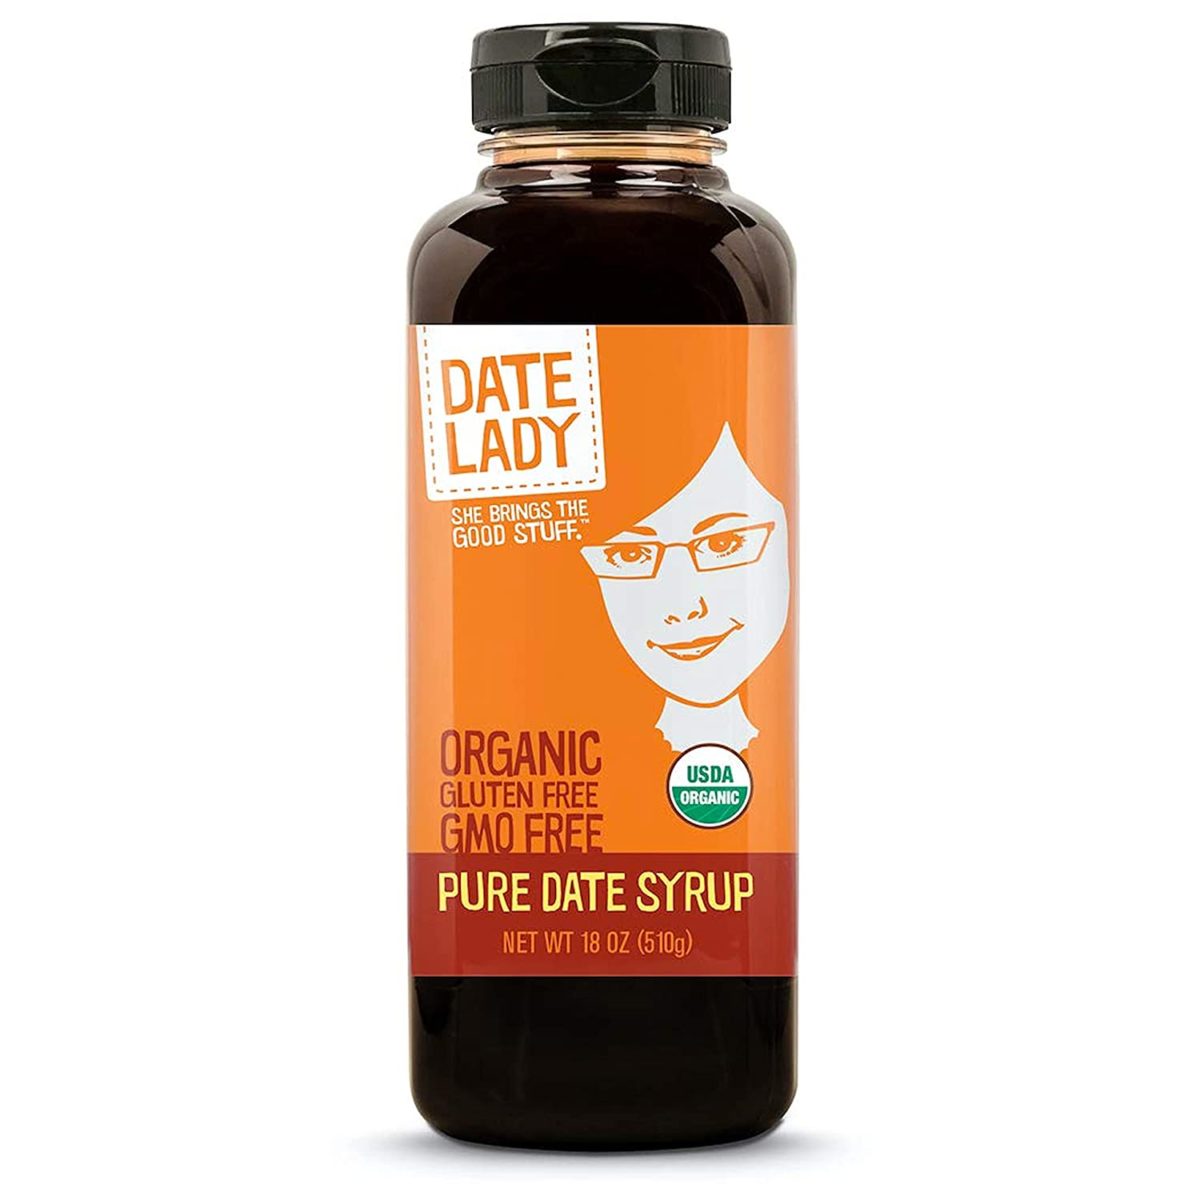 Date syrup is a good substitute for rice syrup